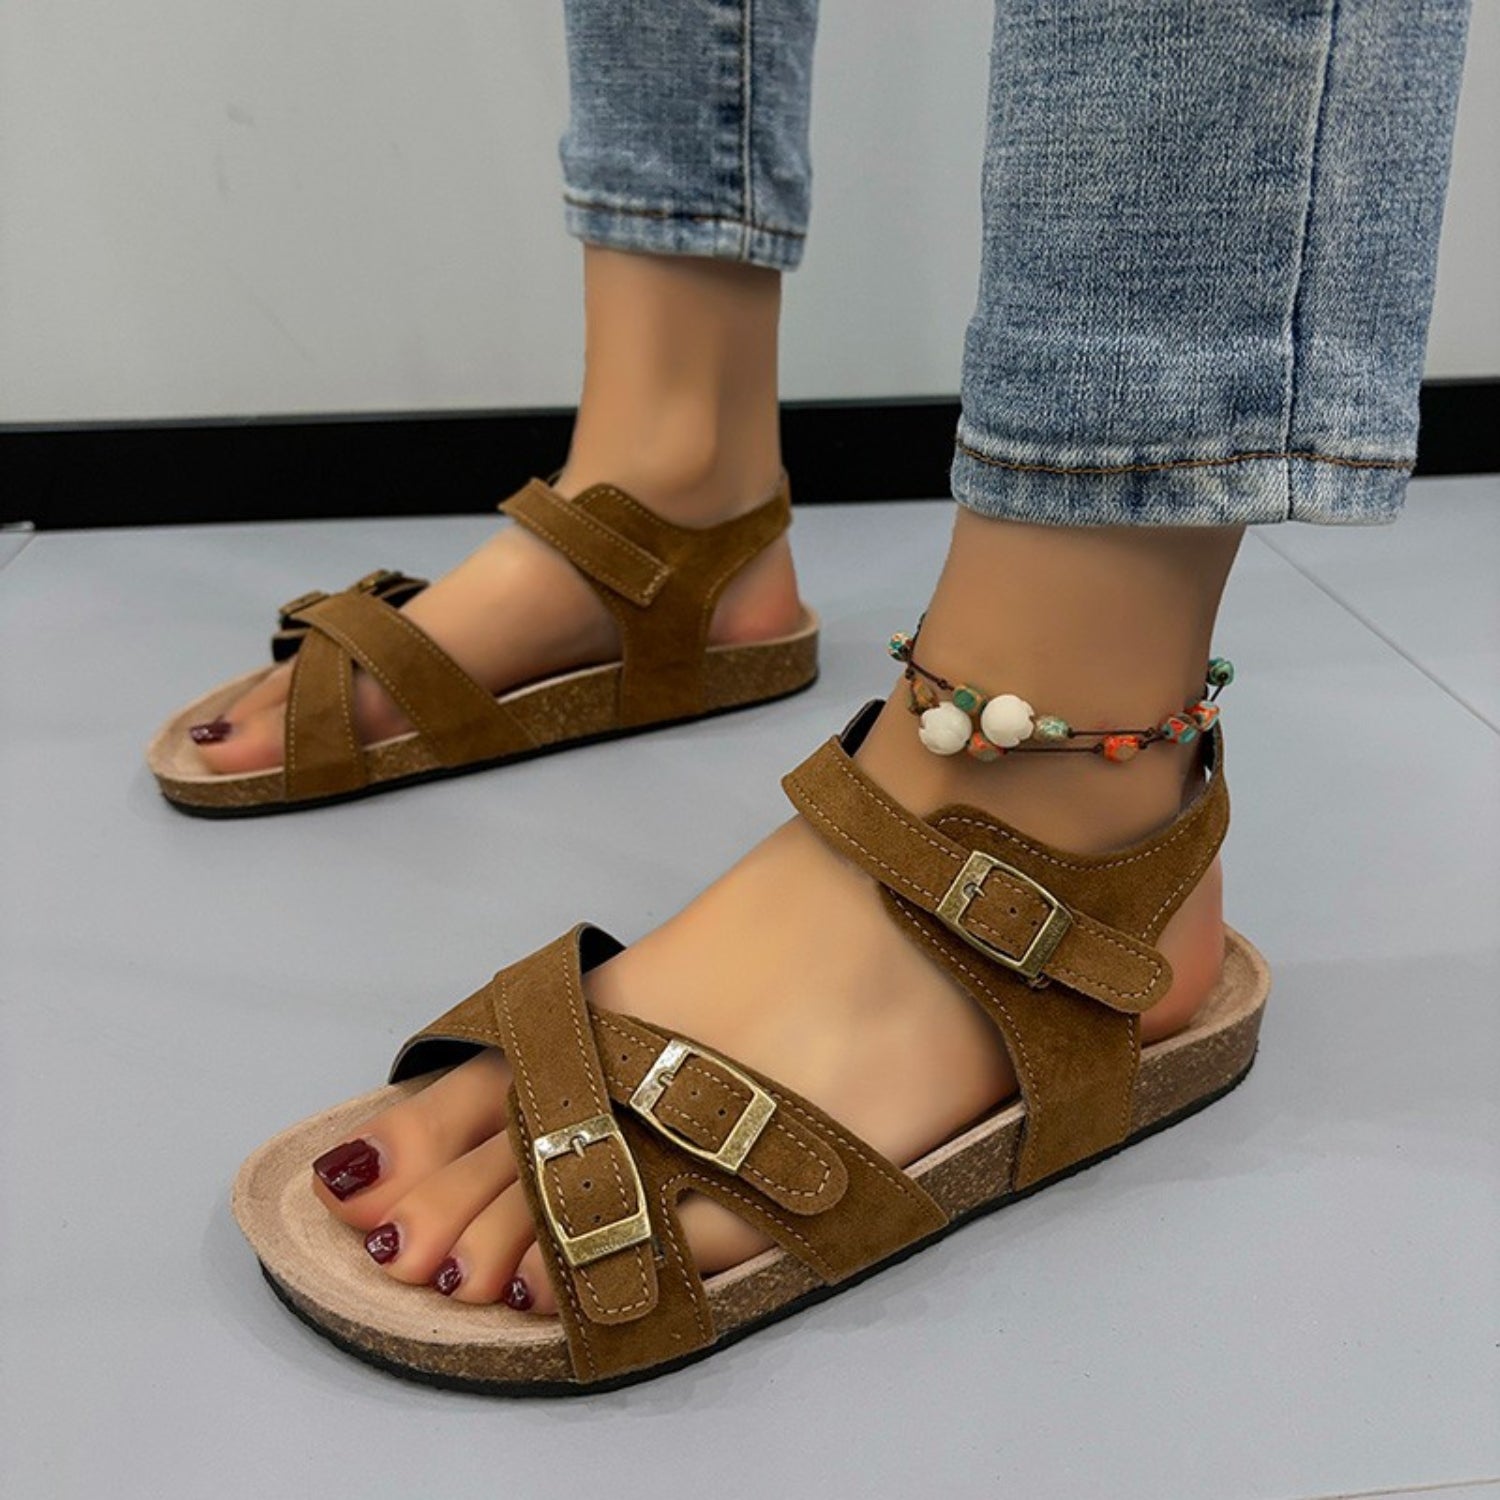 Stylish buckle sandals in a versatile hue, available at GemThreads Boutique.